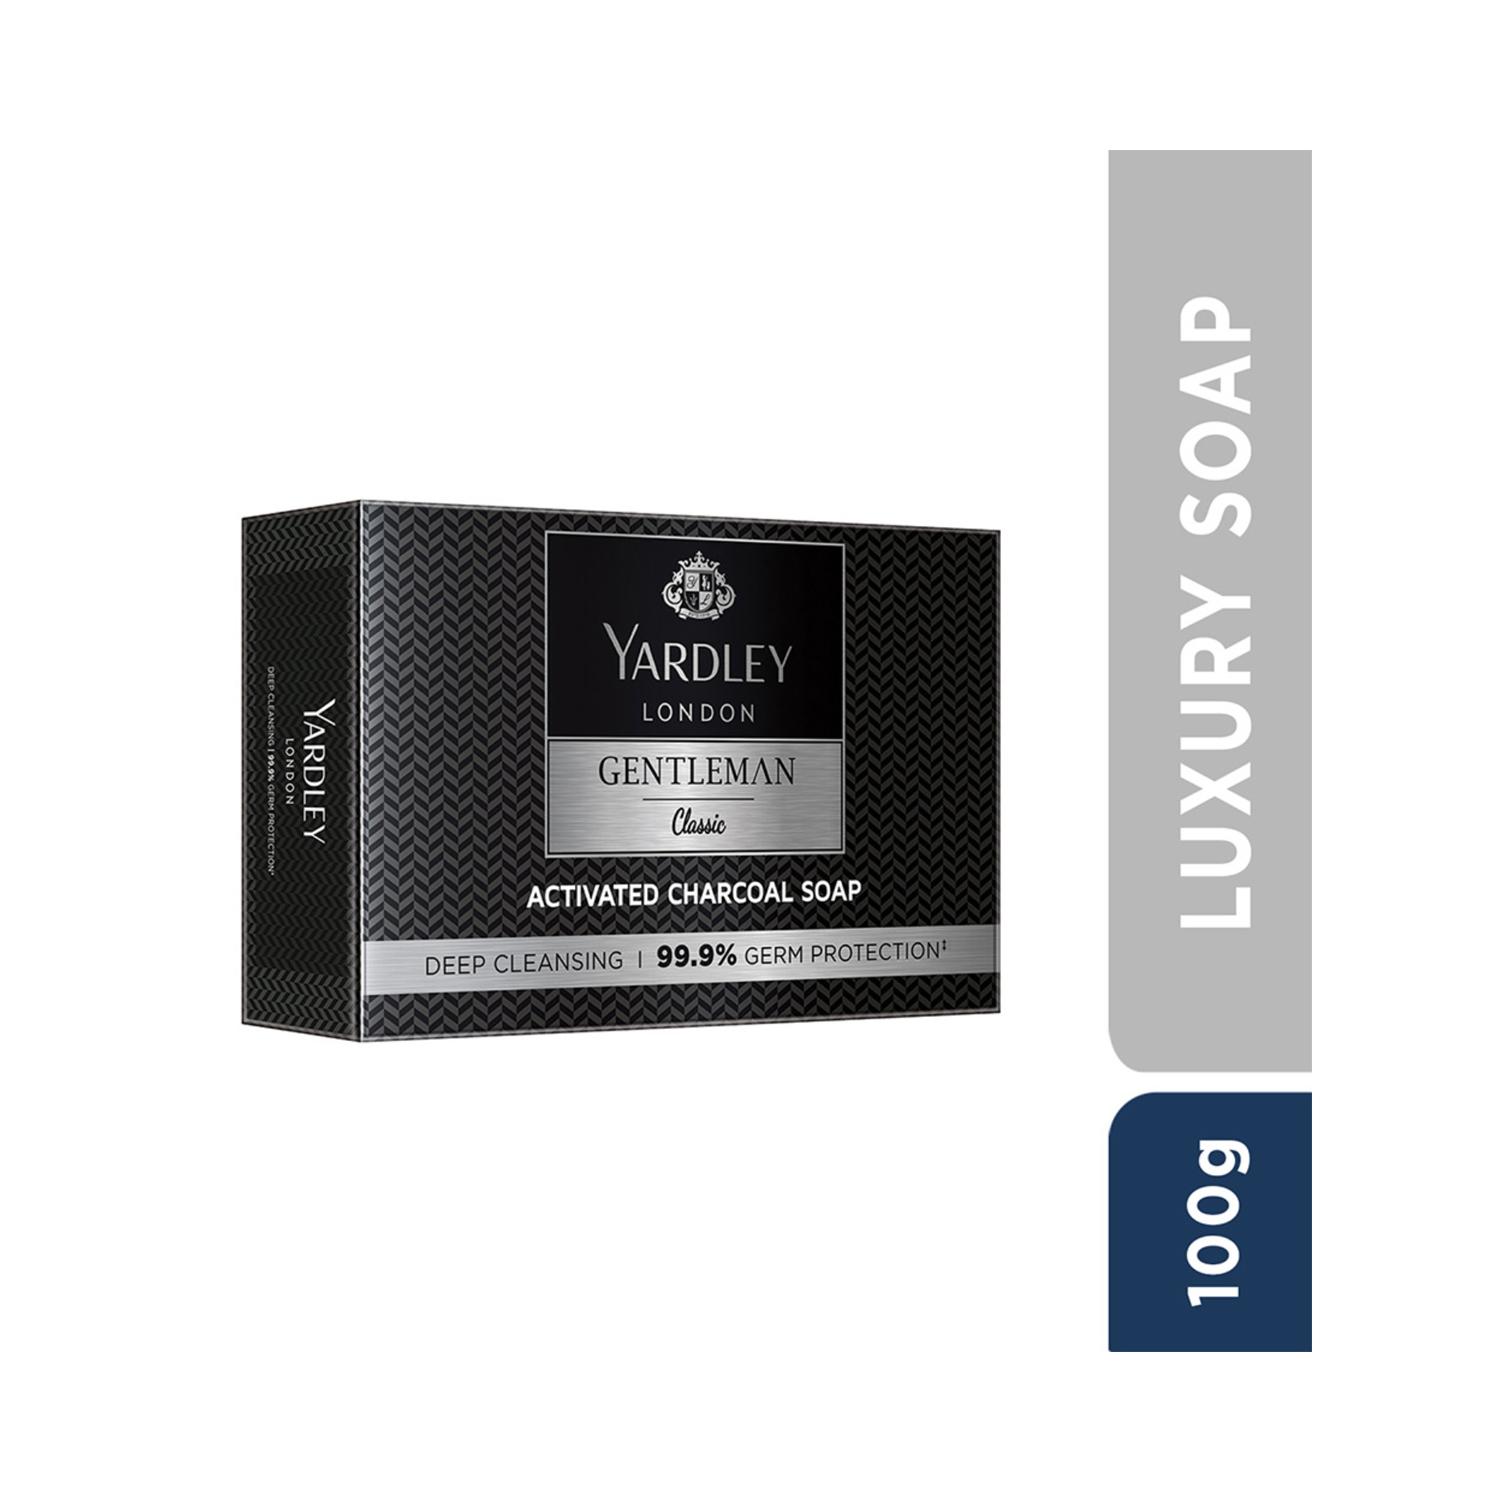 Yardley London Gentleman Classic Activated Charcoal Soap (100g)